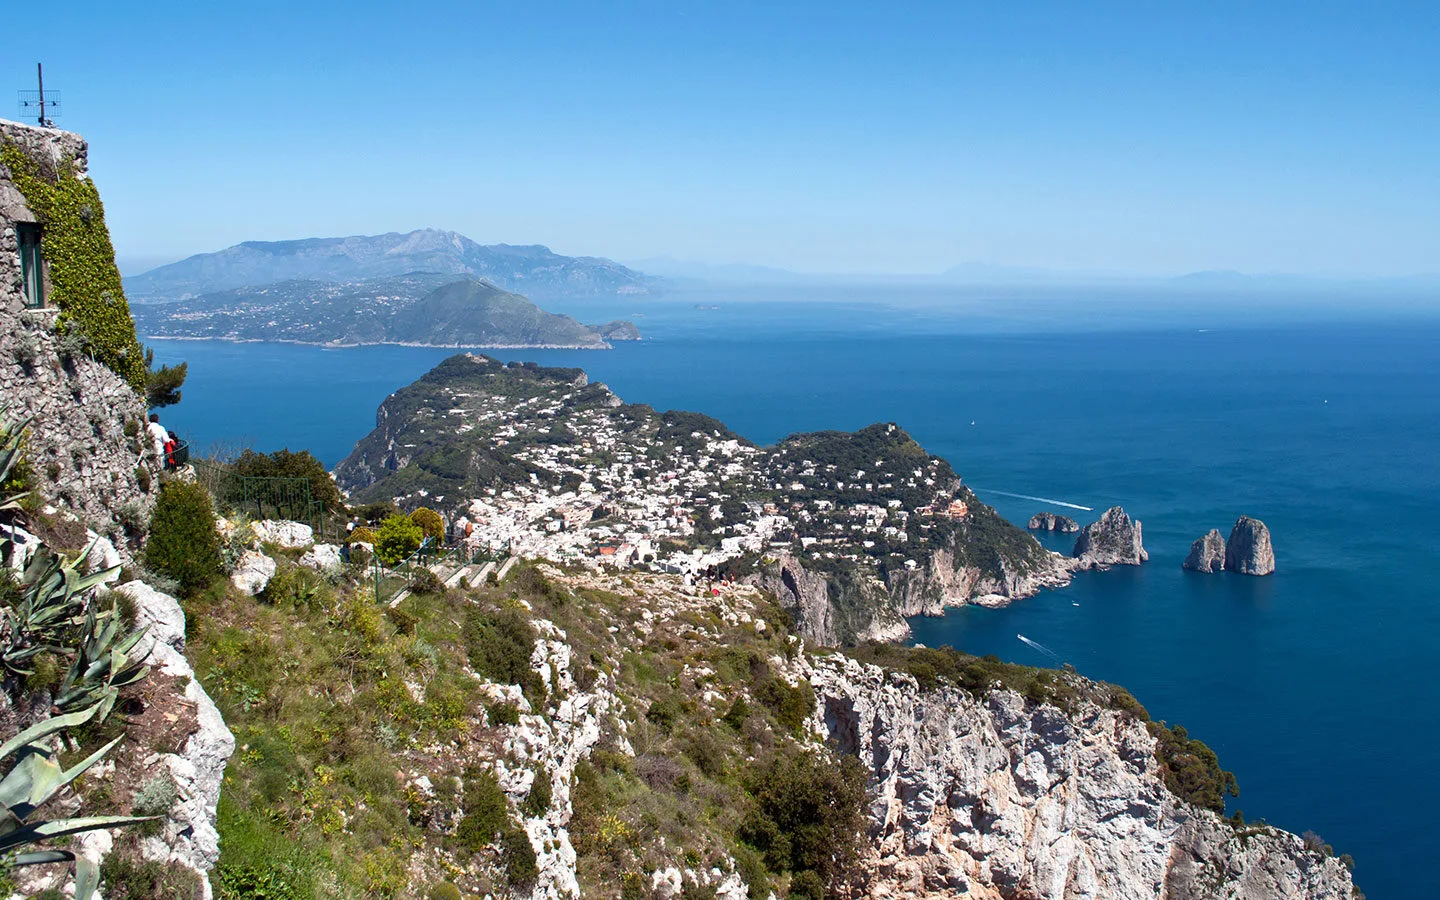 Views of Capri town and the Faraglioni rock formations from Monte Solaro